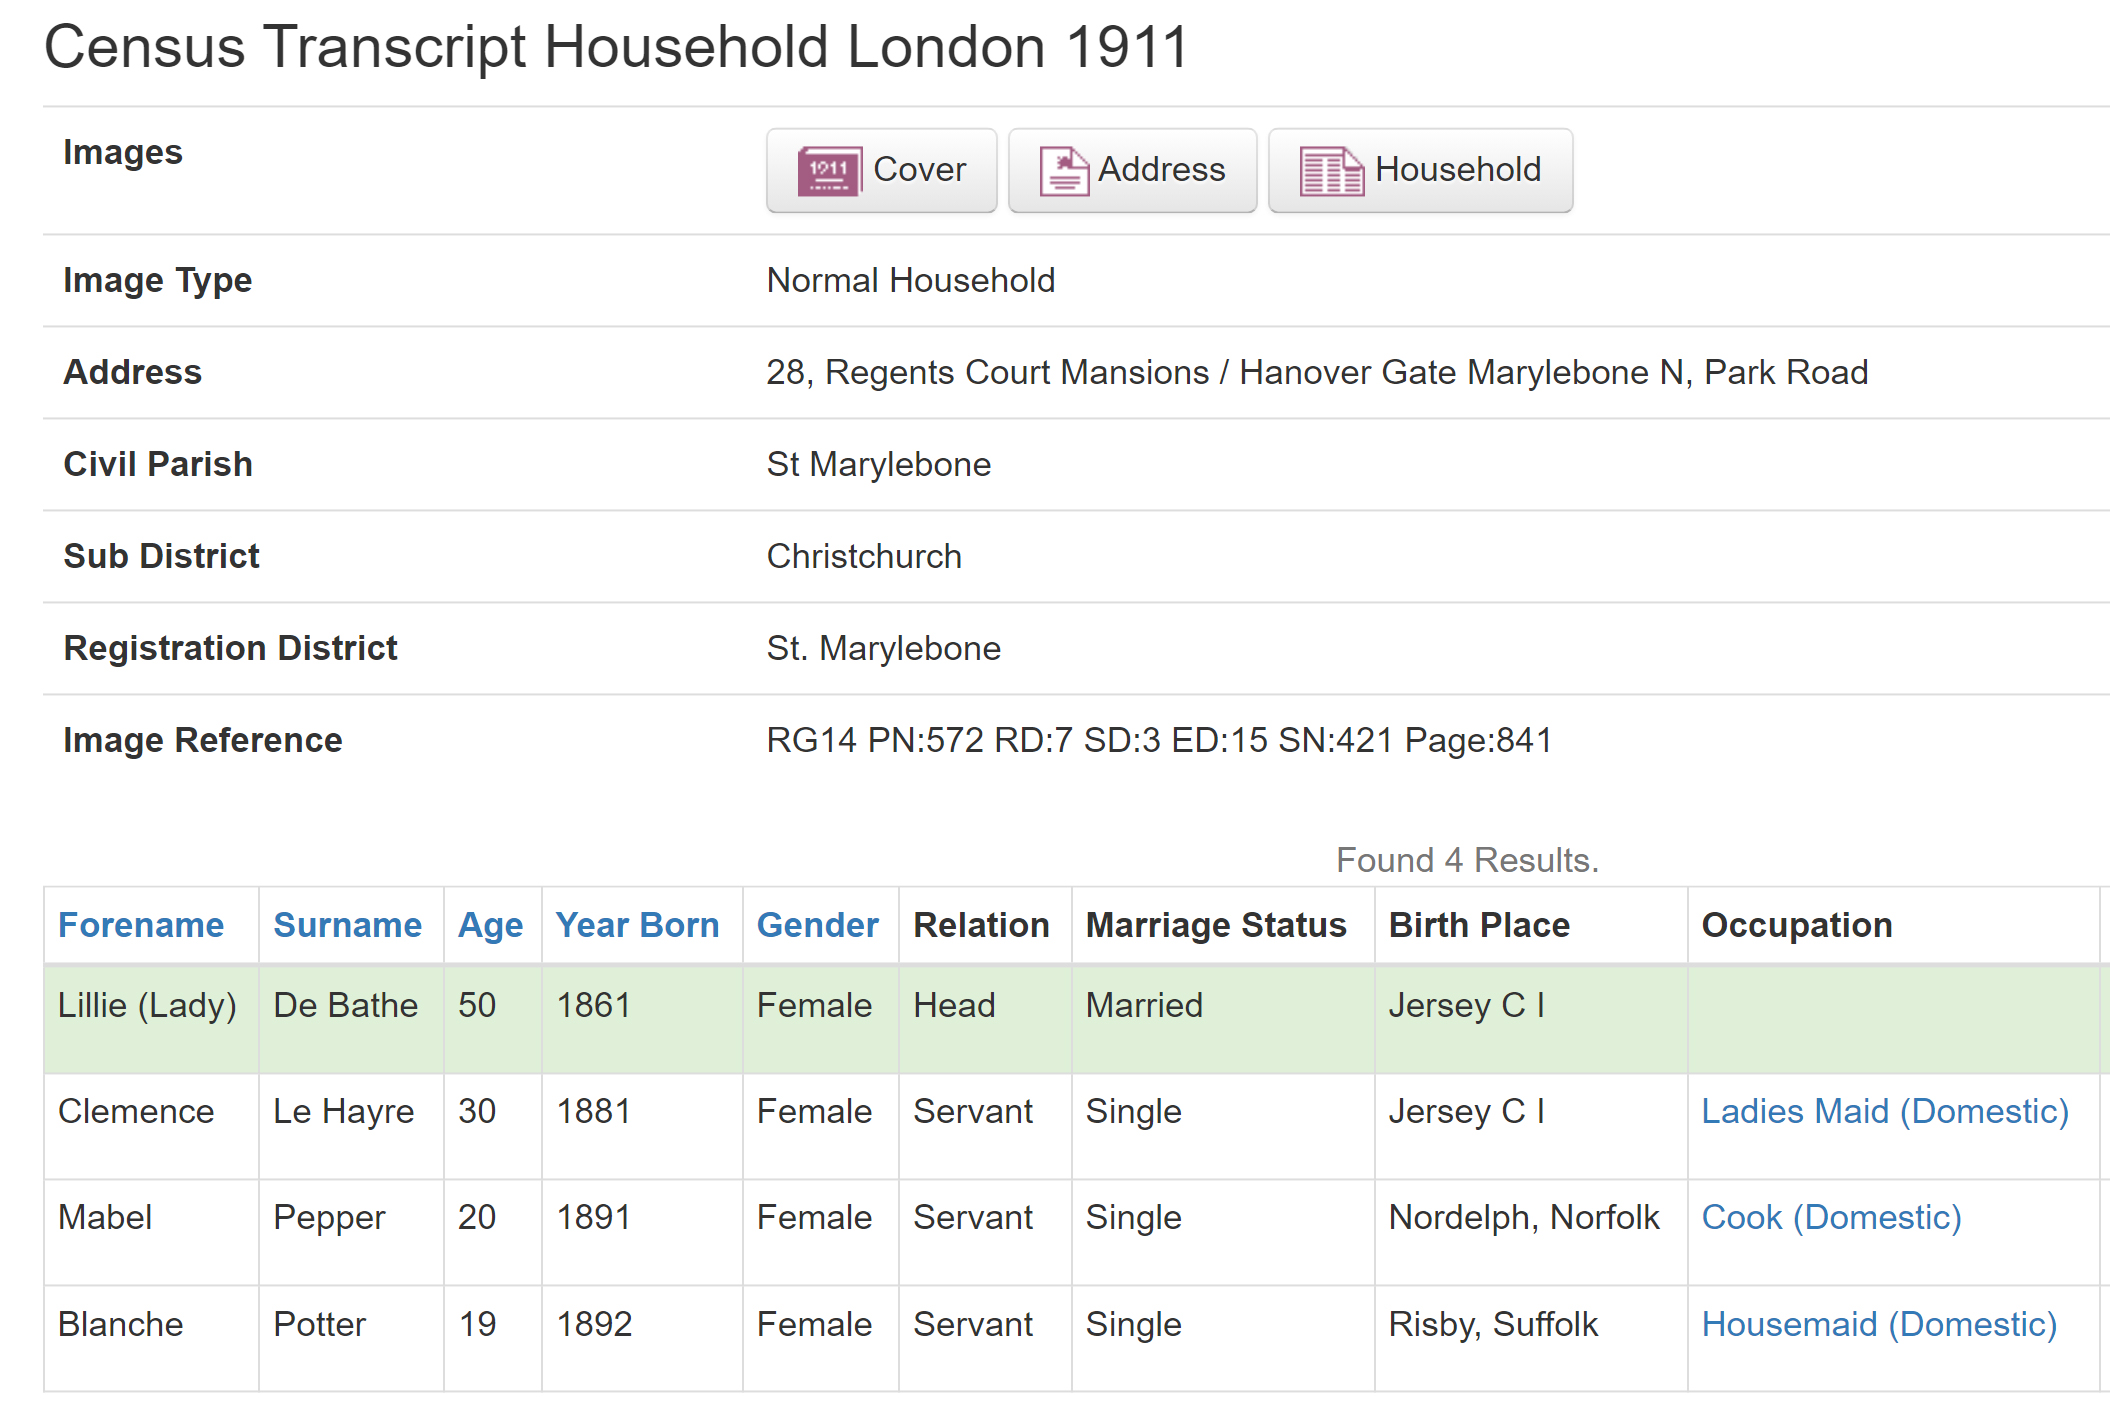 Lillie Langtry in the London 1911 Census